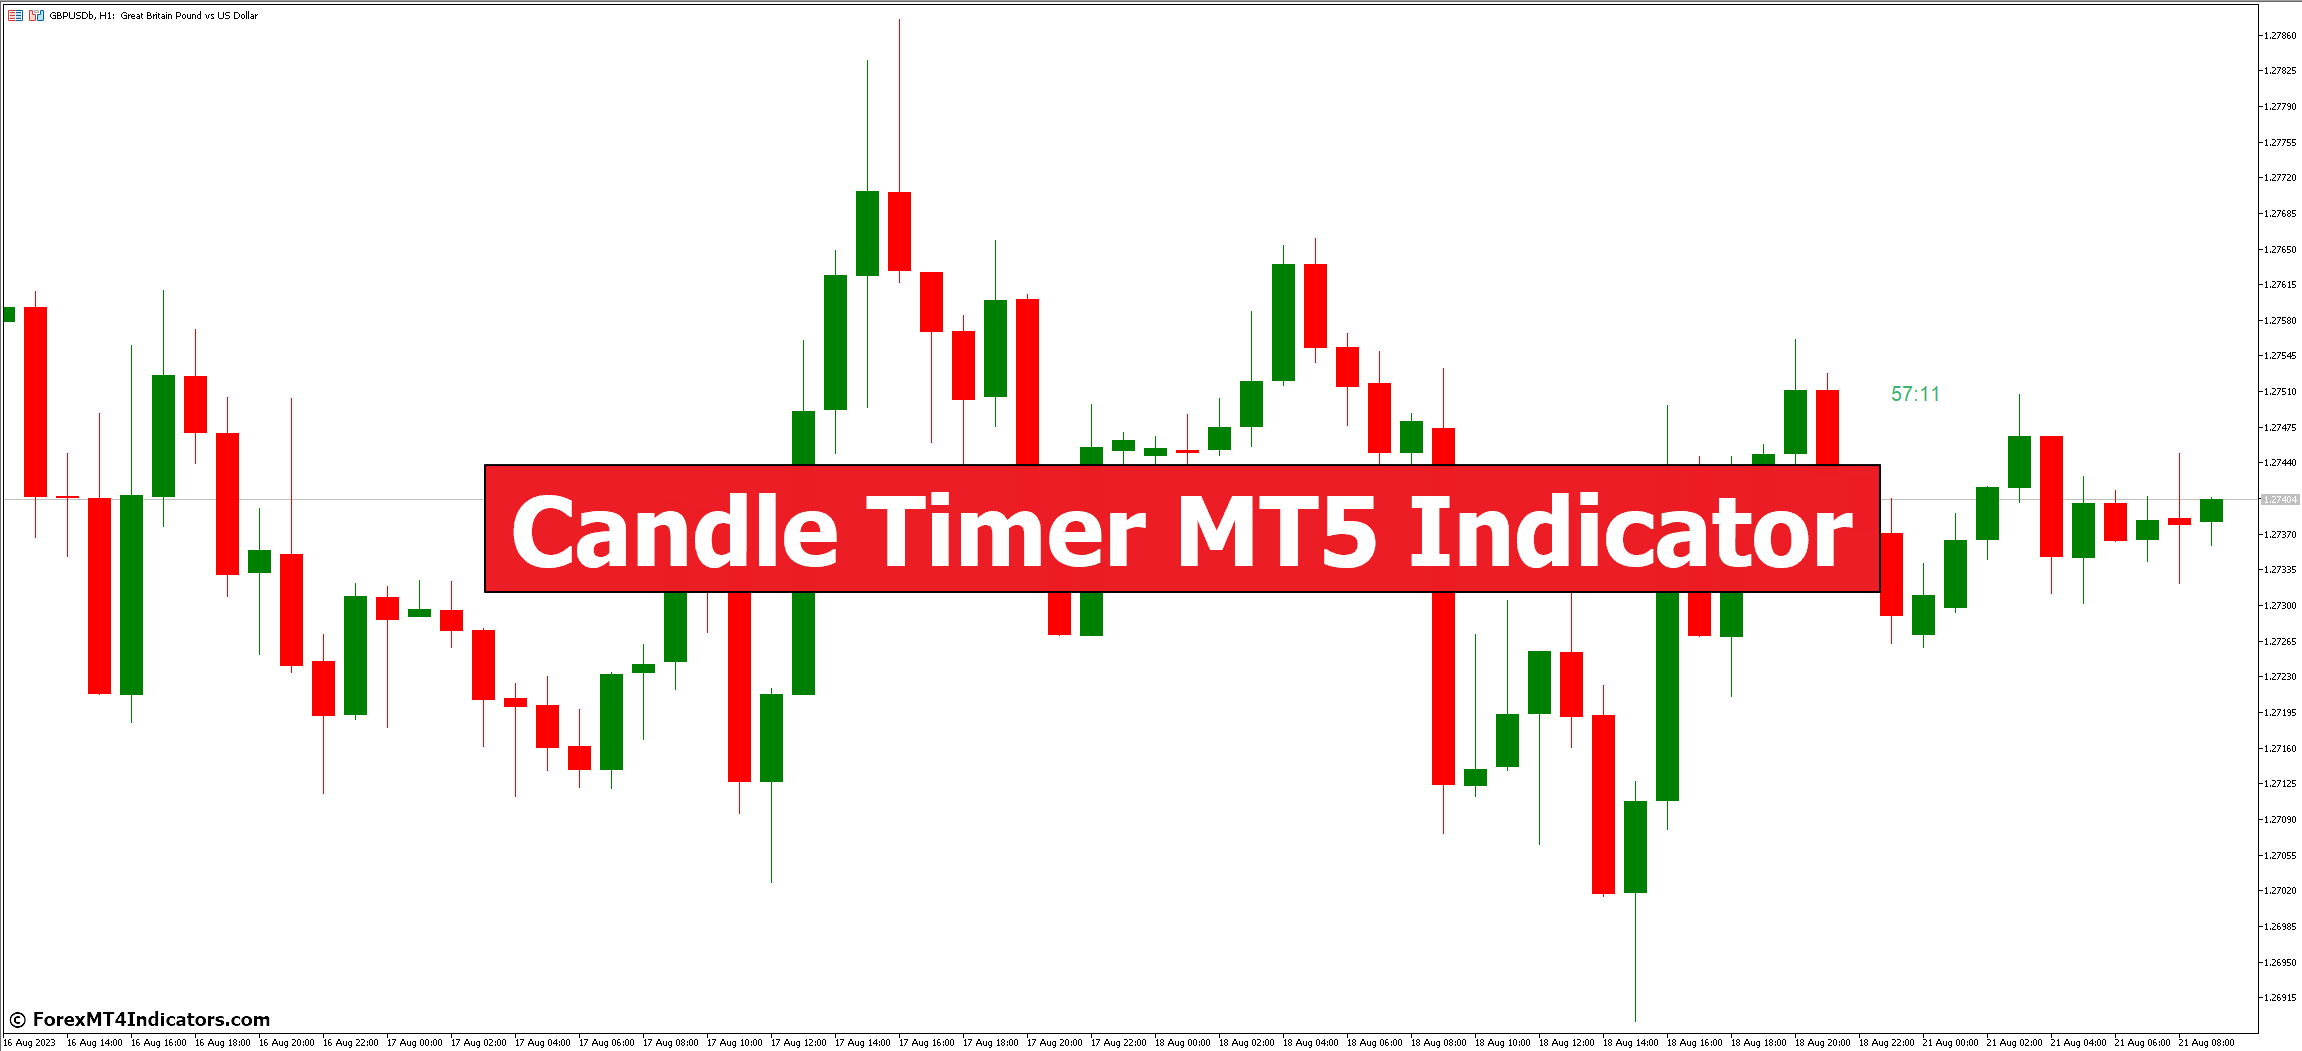 Candle Timer MT5 Indicator